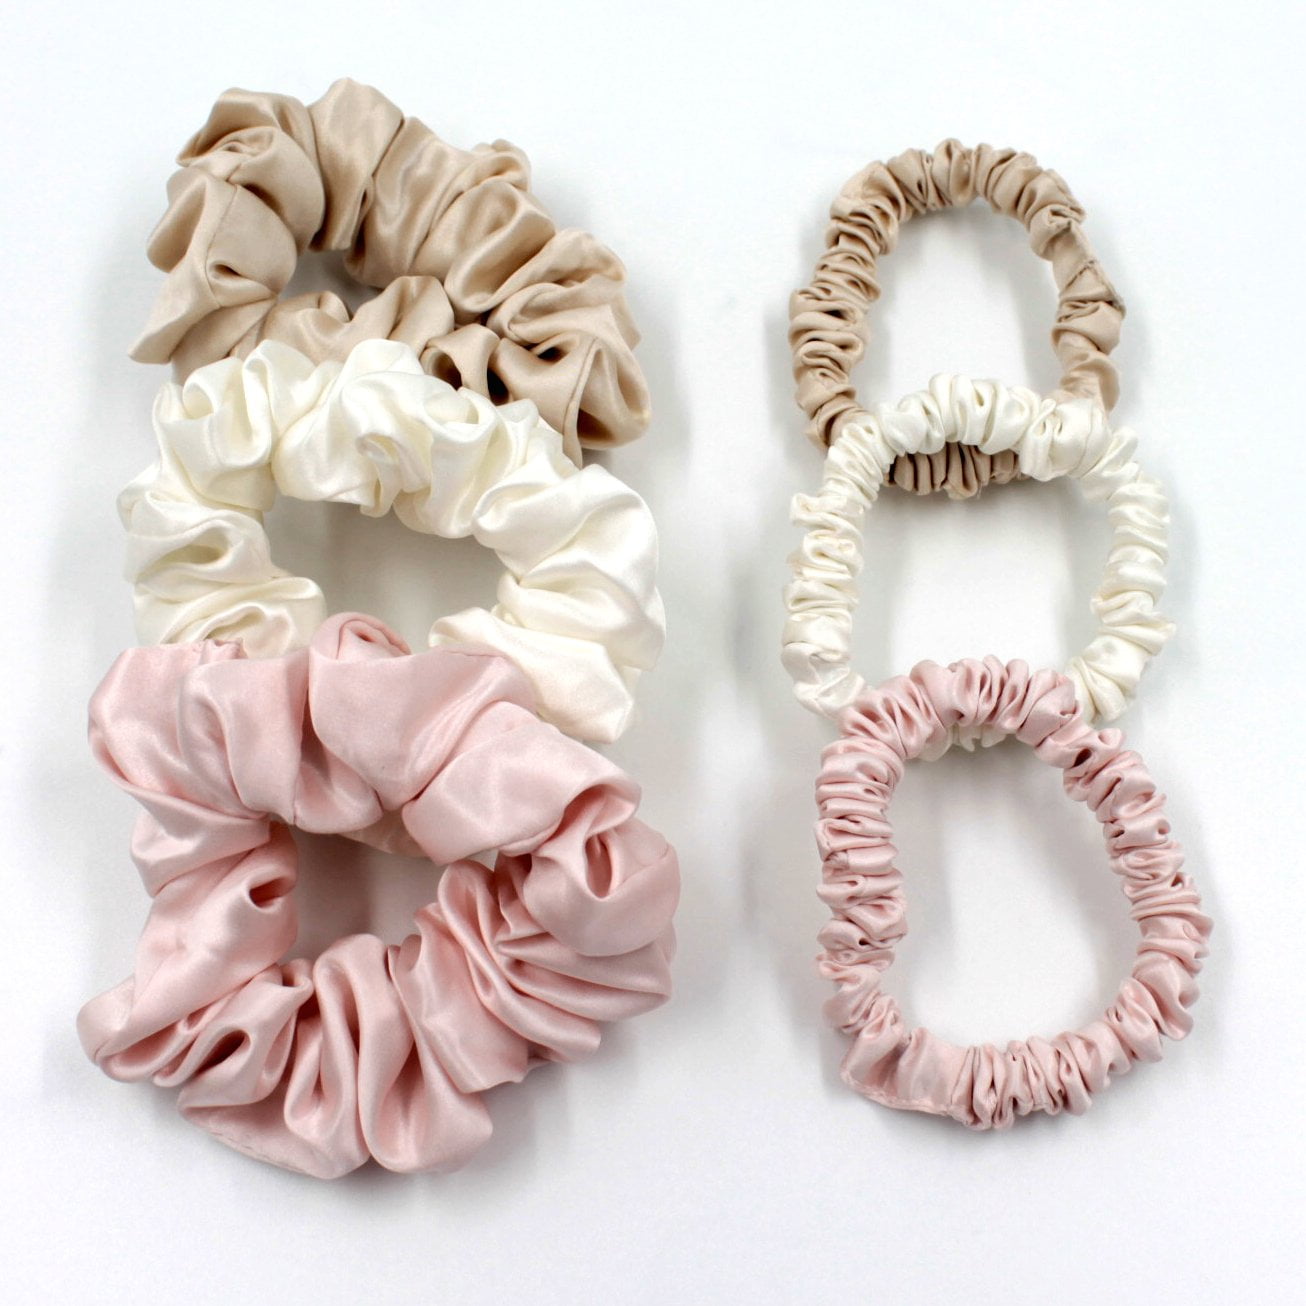 Mulberry Park Silks Pure Silk Hair Scrunchies, 3 Pack - Prevents Frizz, Hair  Breakage, Gentle On All Hair Types, OEKO-TEX Certified, Hair Accessories -  Small (Ivory/Pink/Sand) 